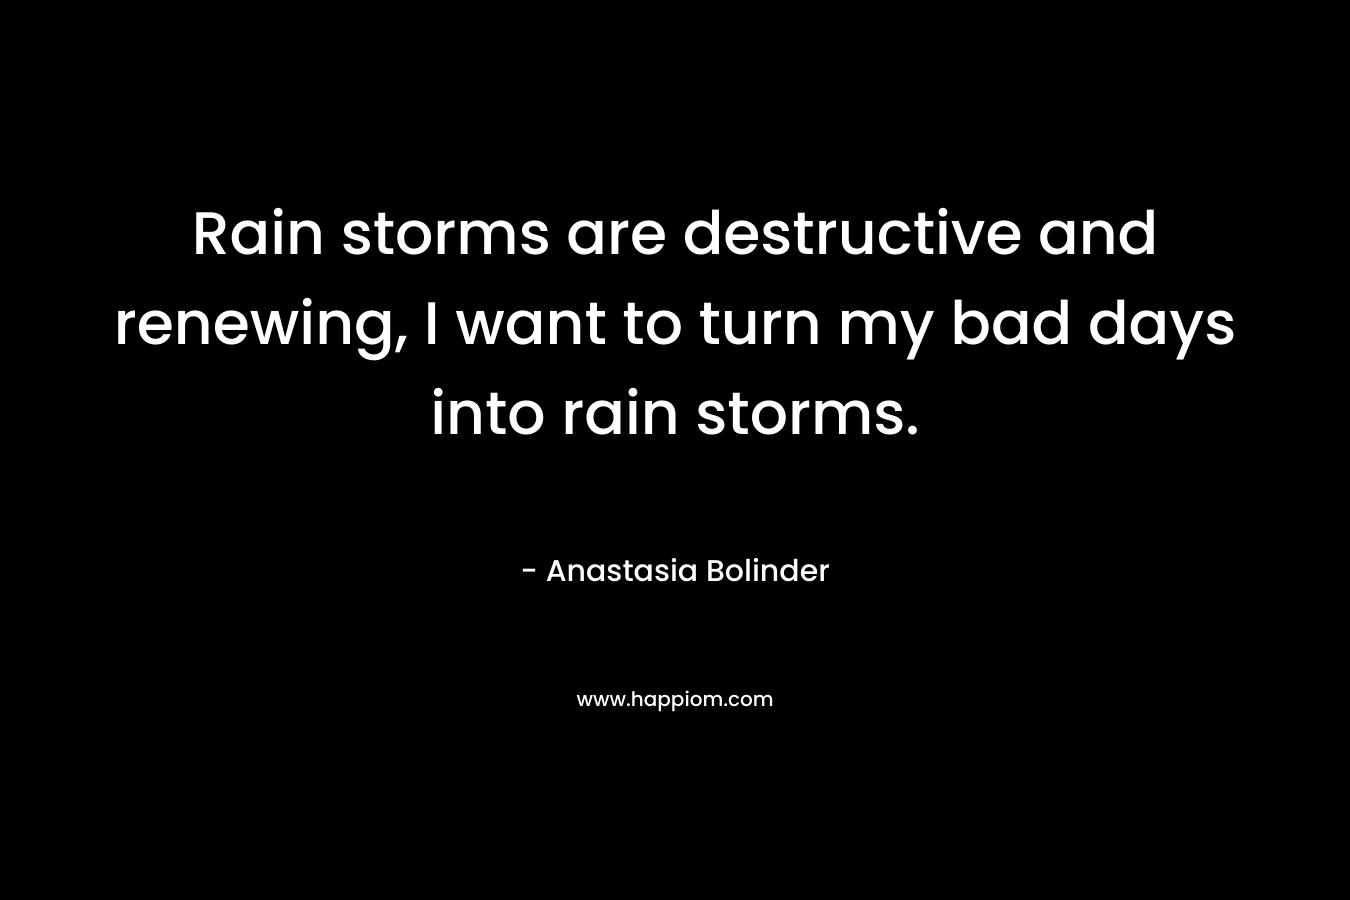 Rain storms are destructive and renewing, I want to turn my bad days into rain storms.